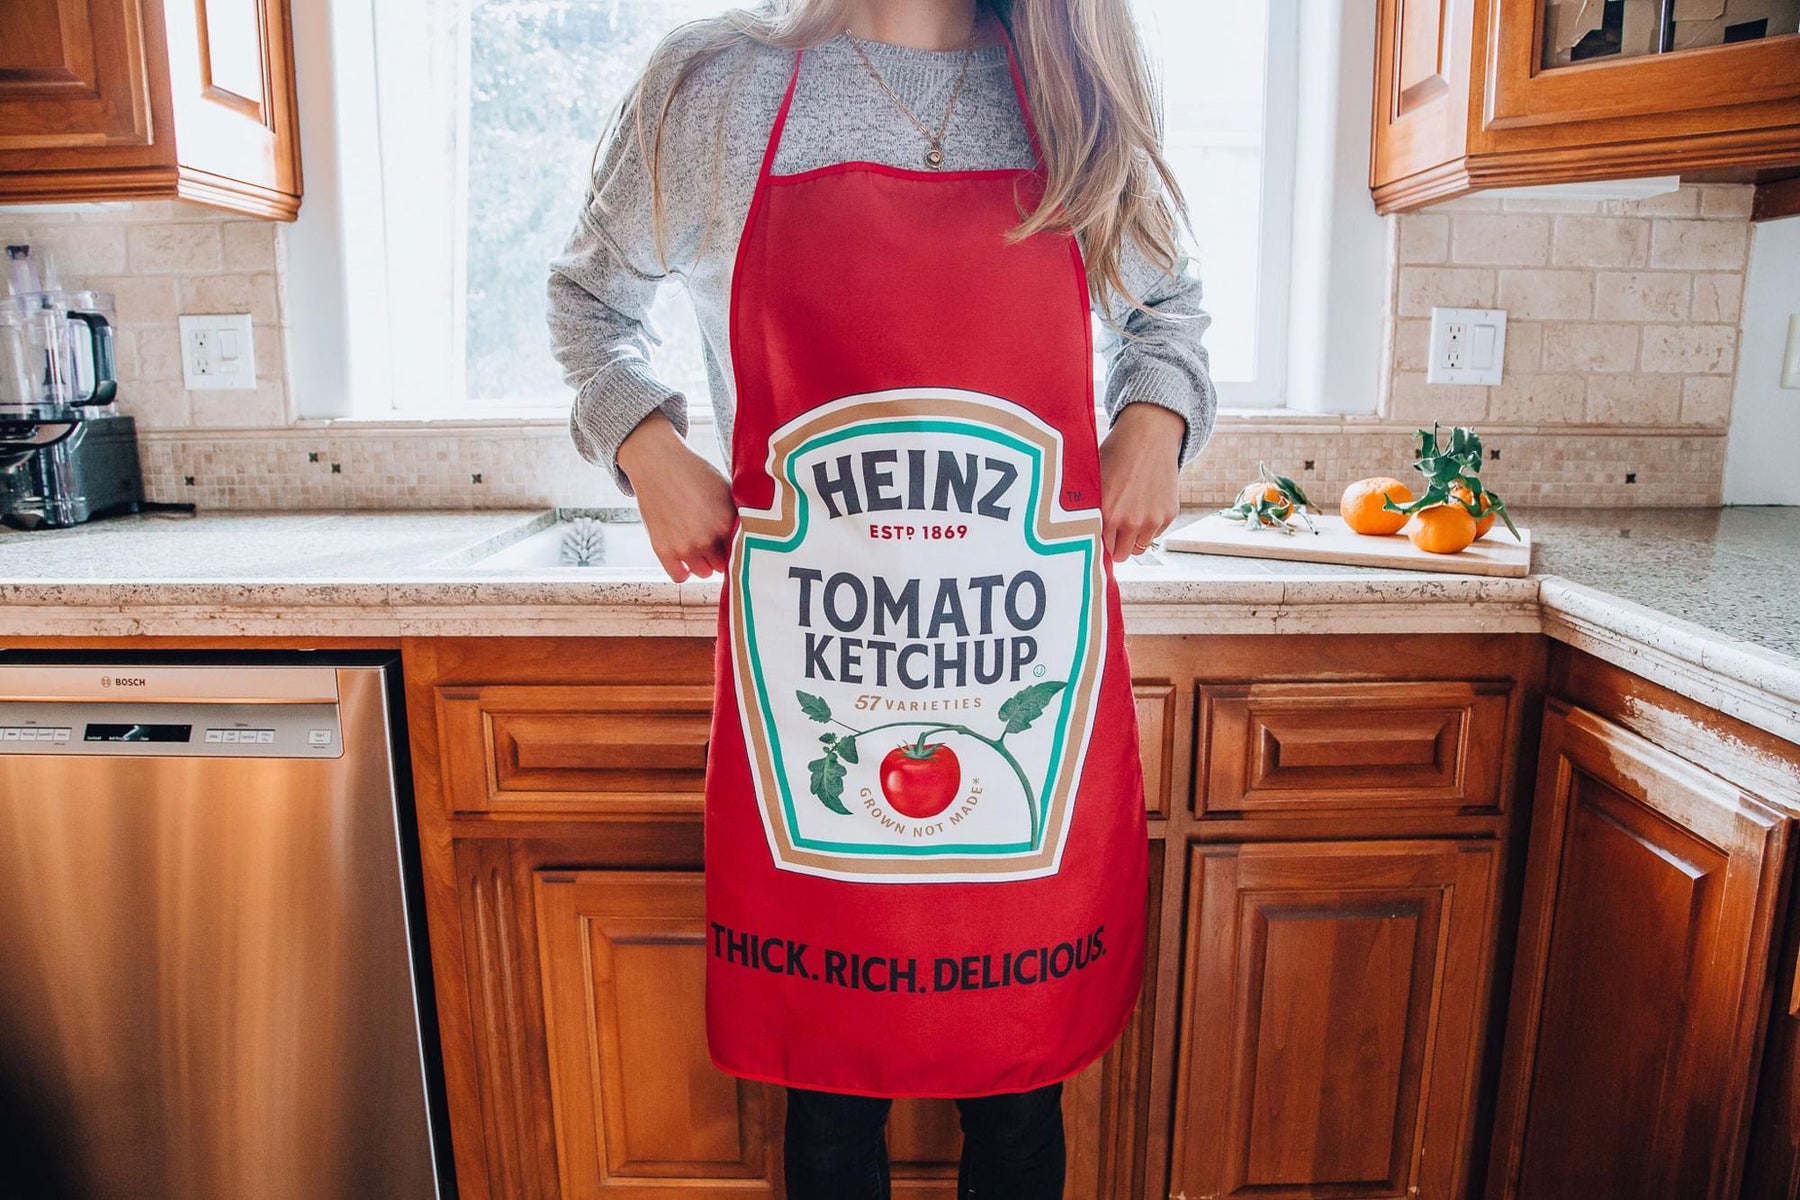 Heinz Tomato Ketchup Cooking Apron | One Size Fits Most Adults